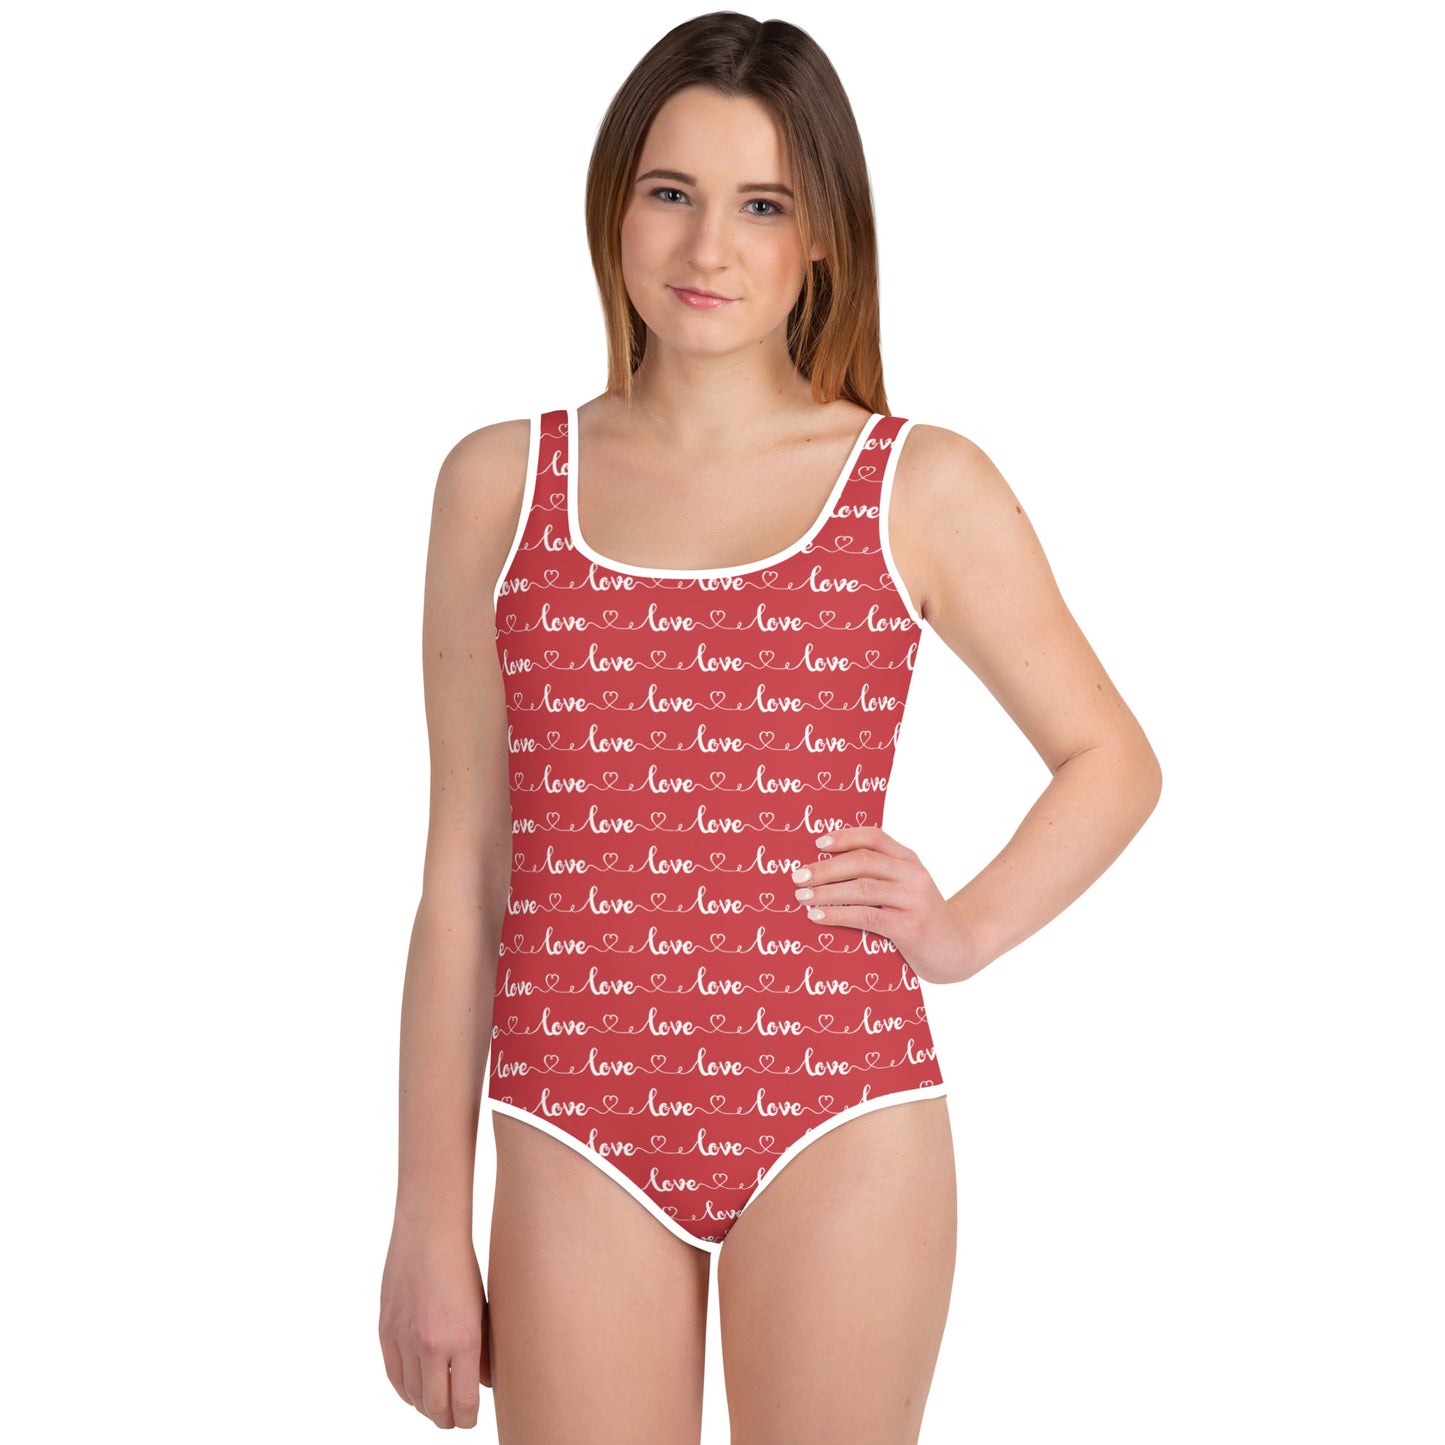 Love, Love, Love... - Youth Swimsuit